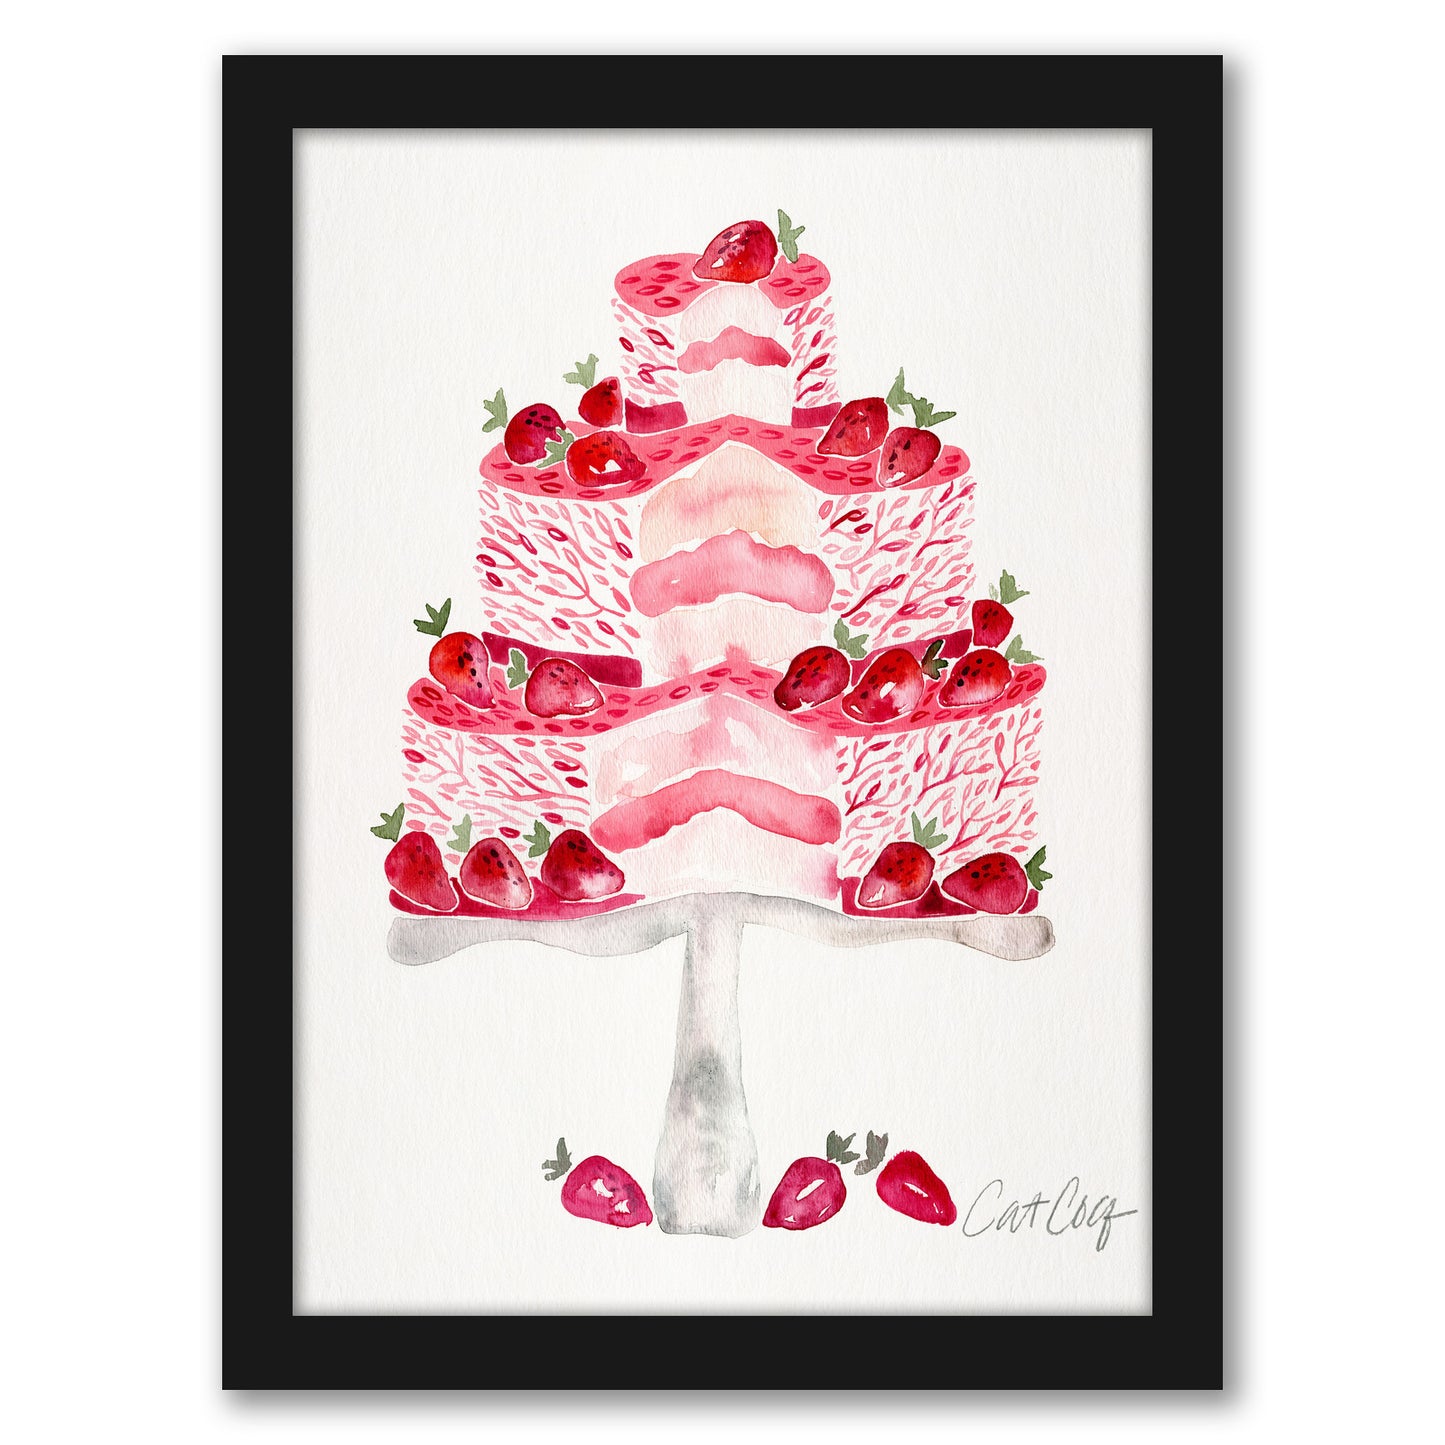 Strawberry Short Cake by Cat Coquillette - Framed Print